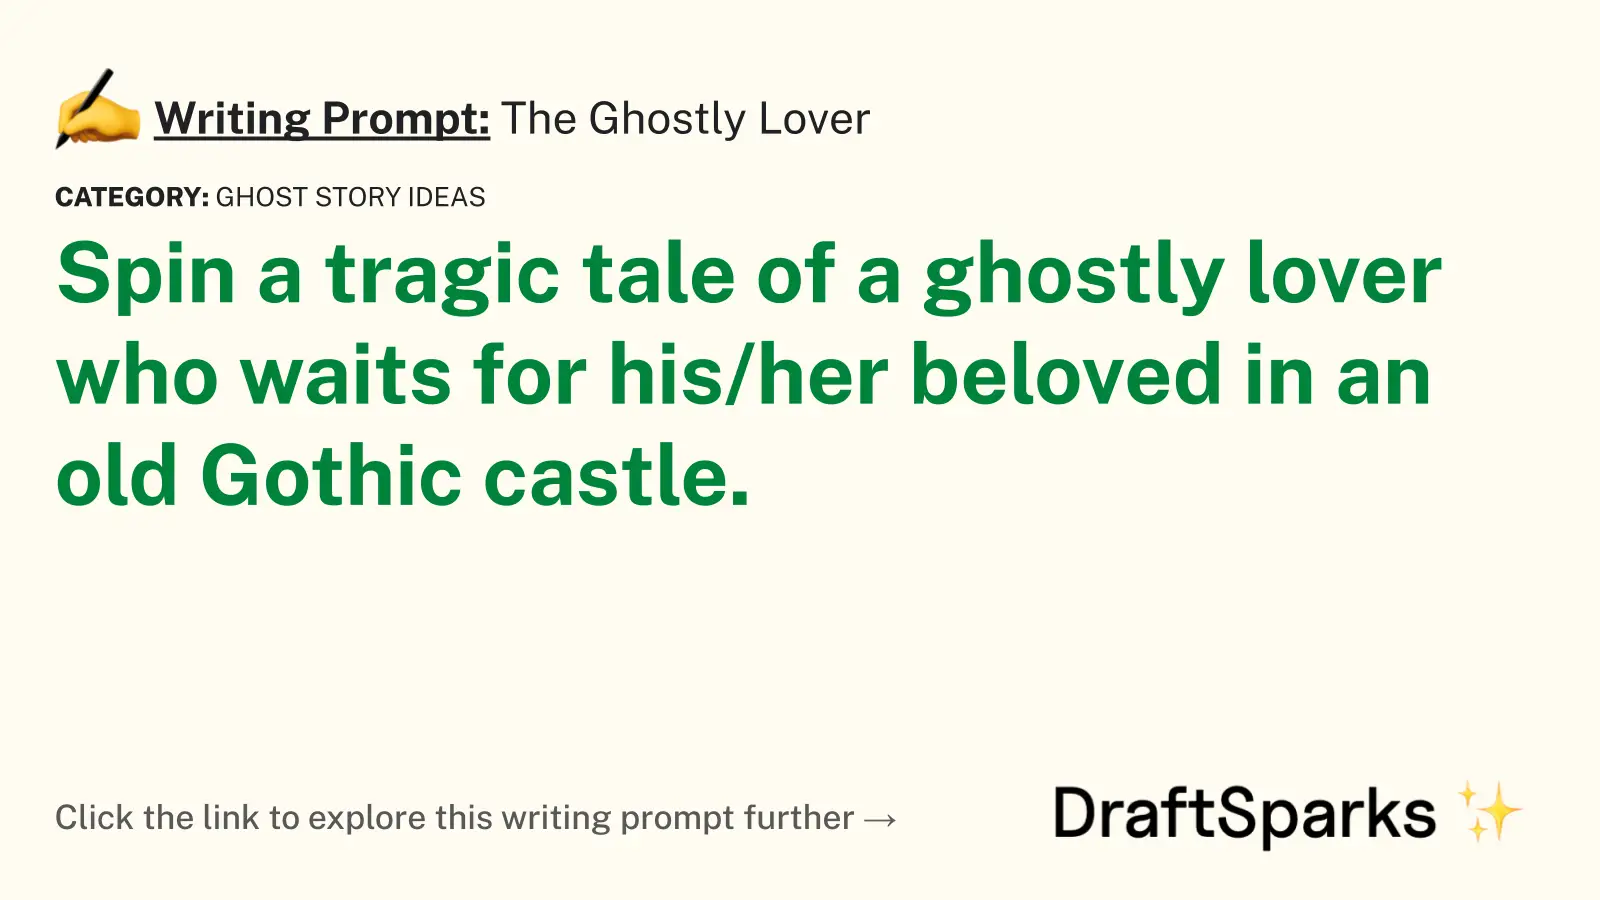 The Ghostly Lover